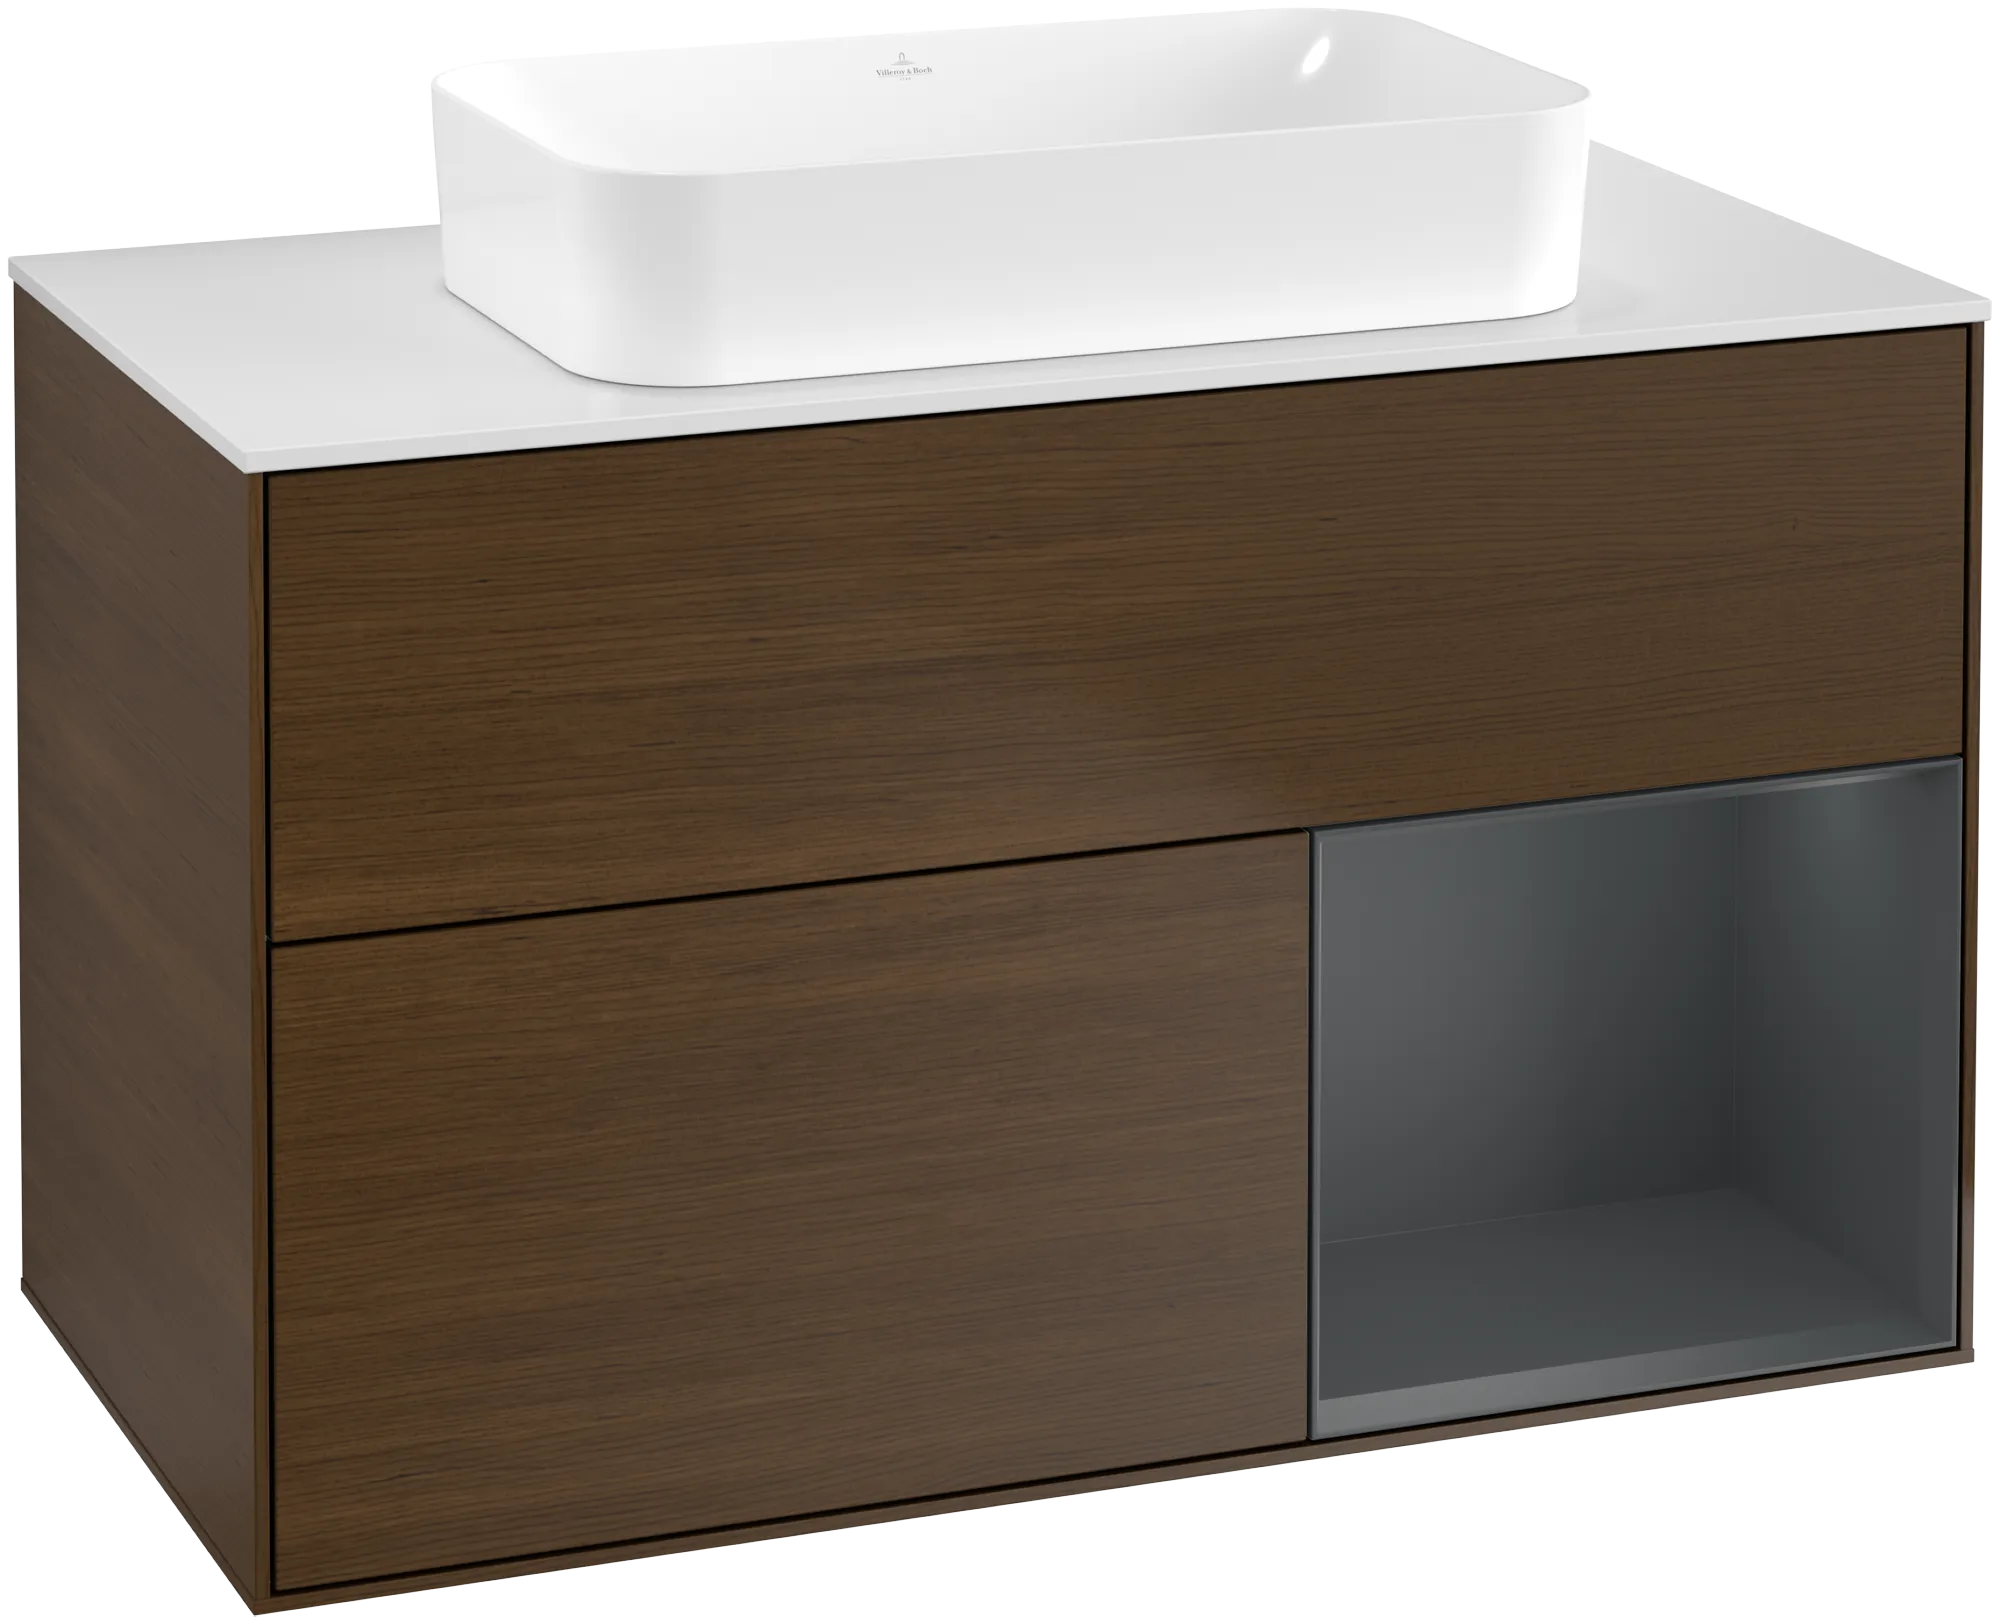 Picture of VILLEROY BOCH Finion Vanity unit, with lighting, 2 pull-out compartments, 1000 x 603 x 501 mm, Walnut Veneer / Midnight Blue Matt Lacquer / Glass White Matt #G661HGGN